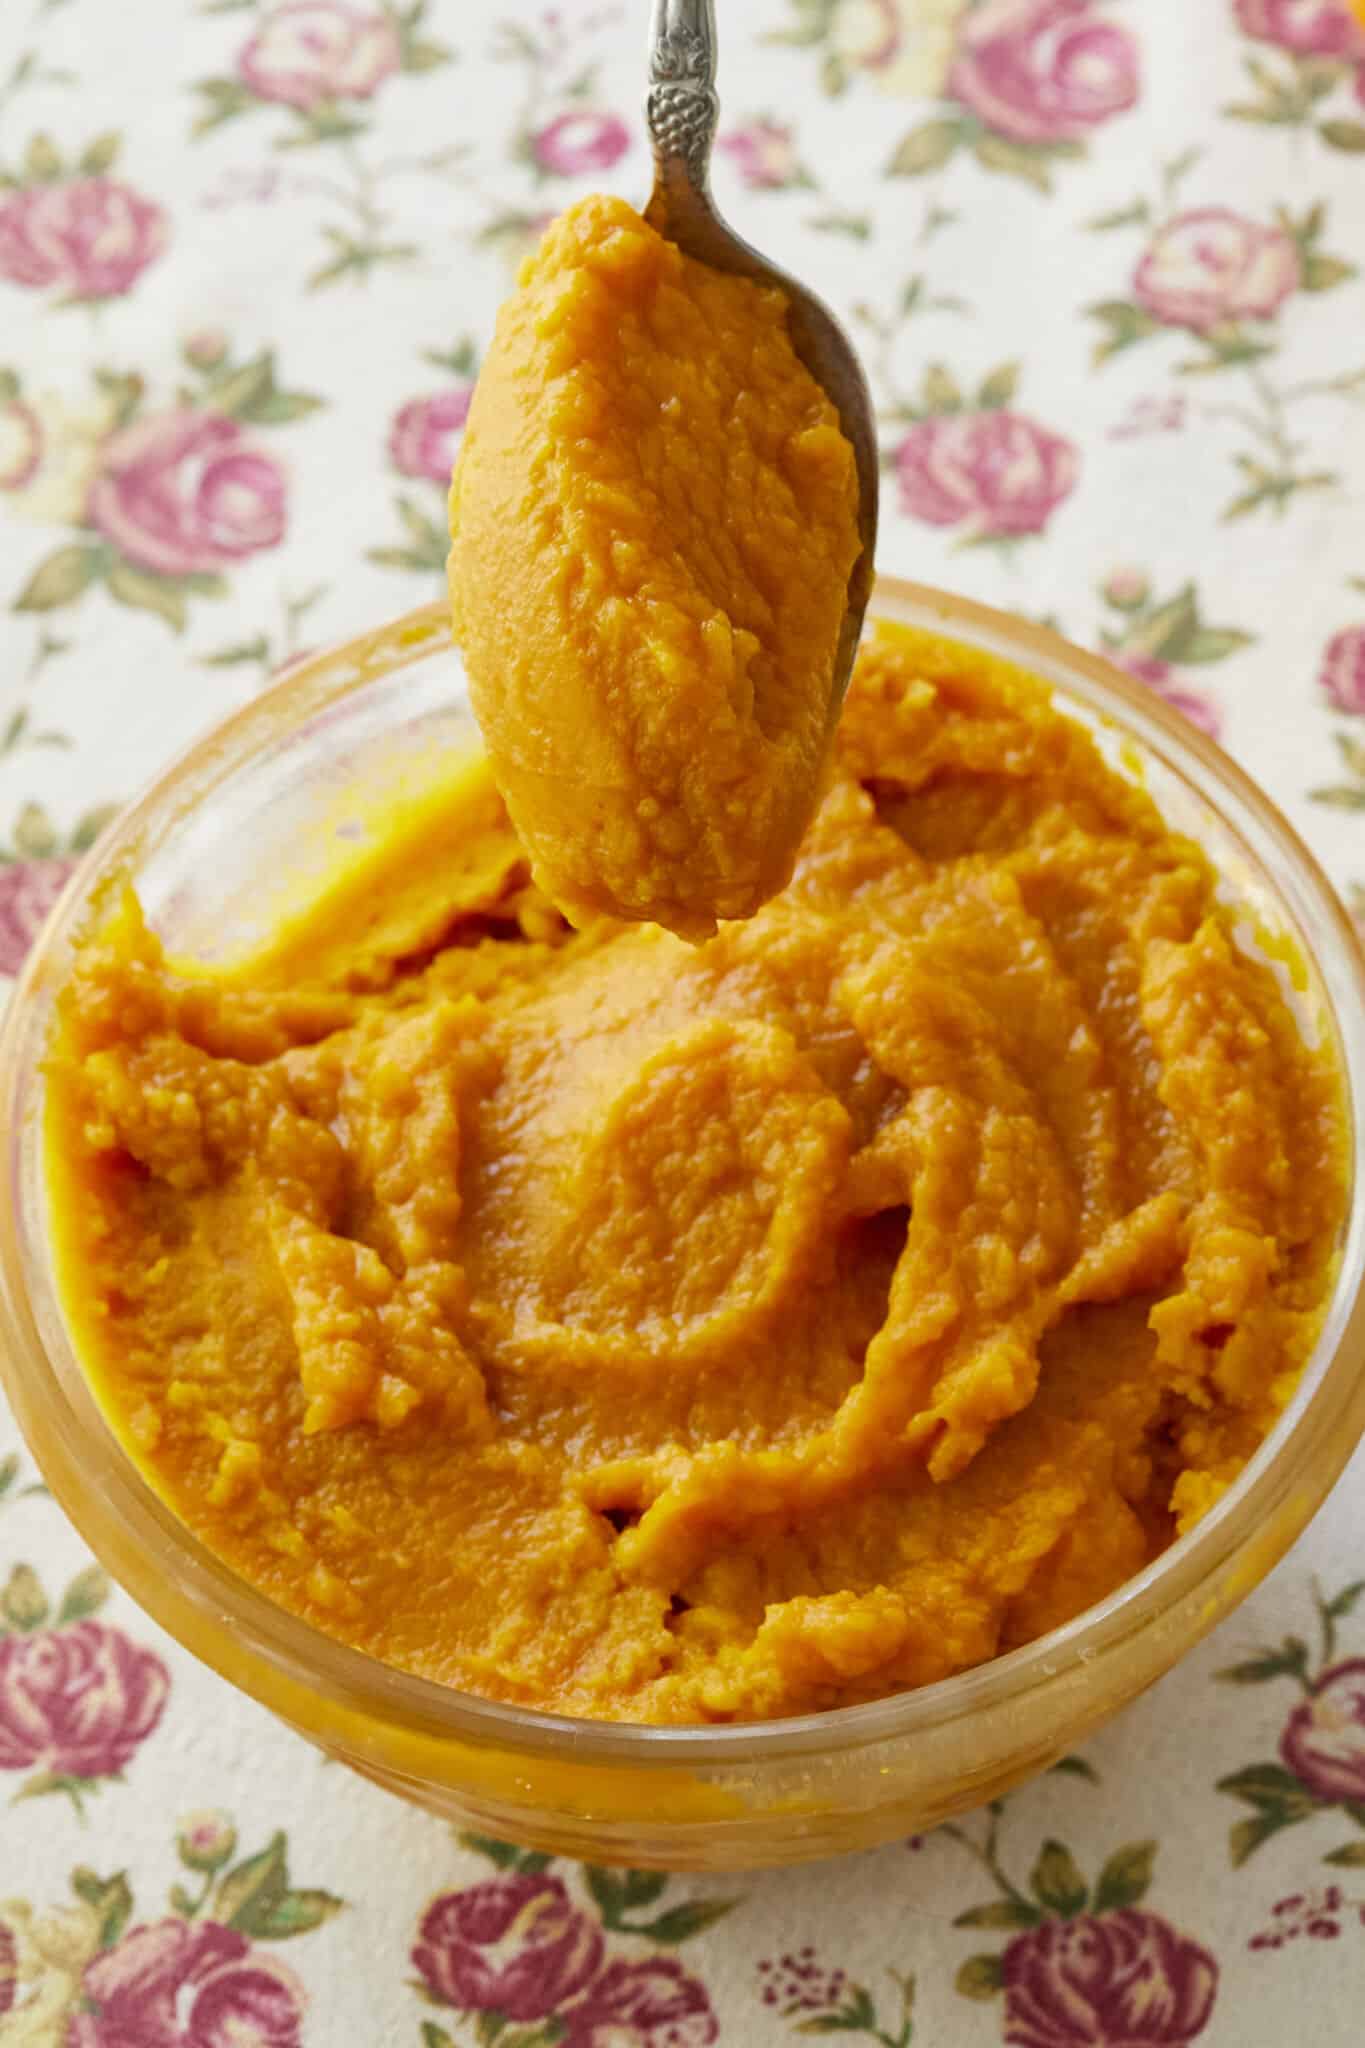 A spoonful of Homemade Pumpkin puree is being lifted from the glass bowl. It's in a vibrant orange color and has a smooth moist consistency. 